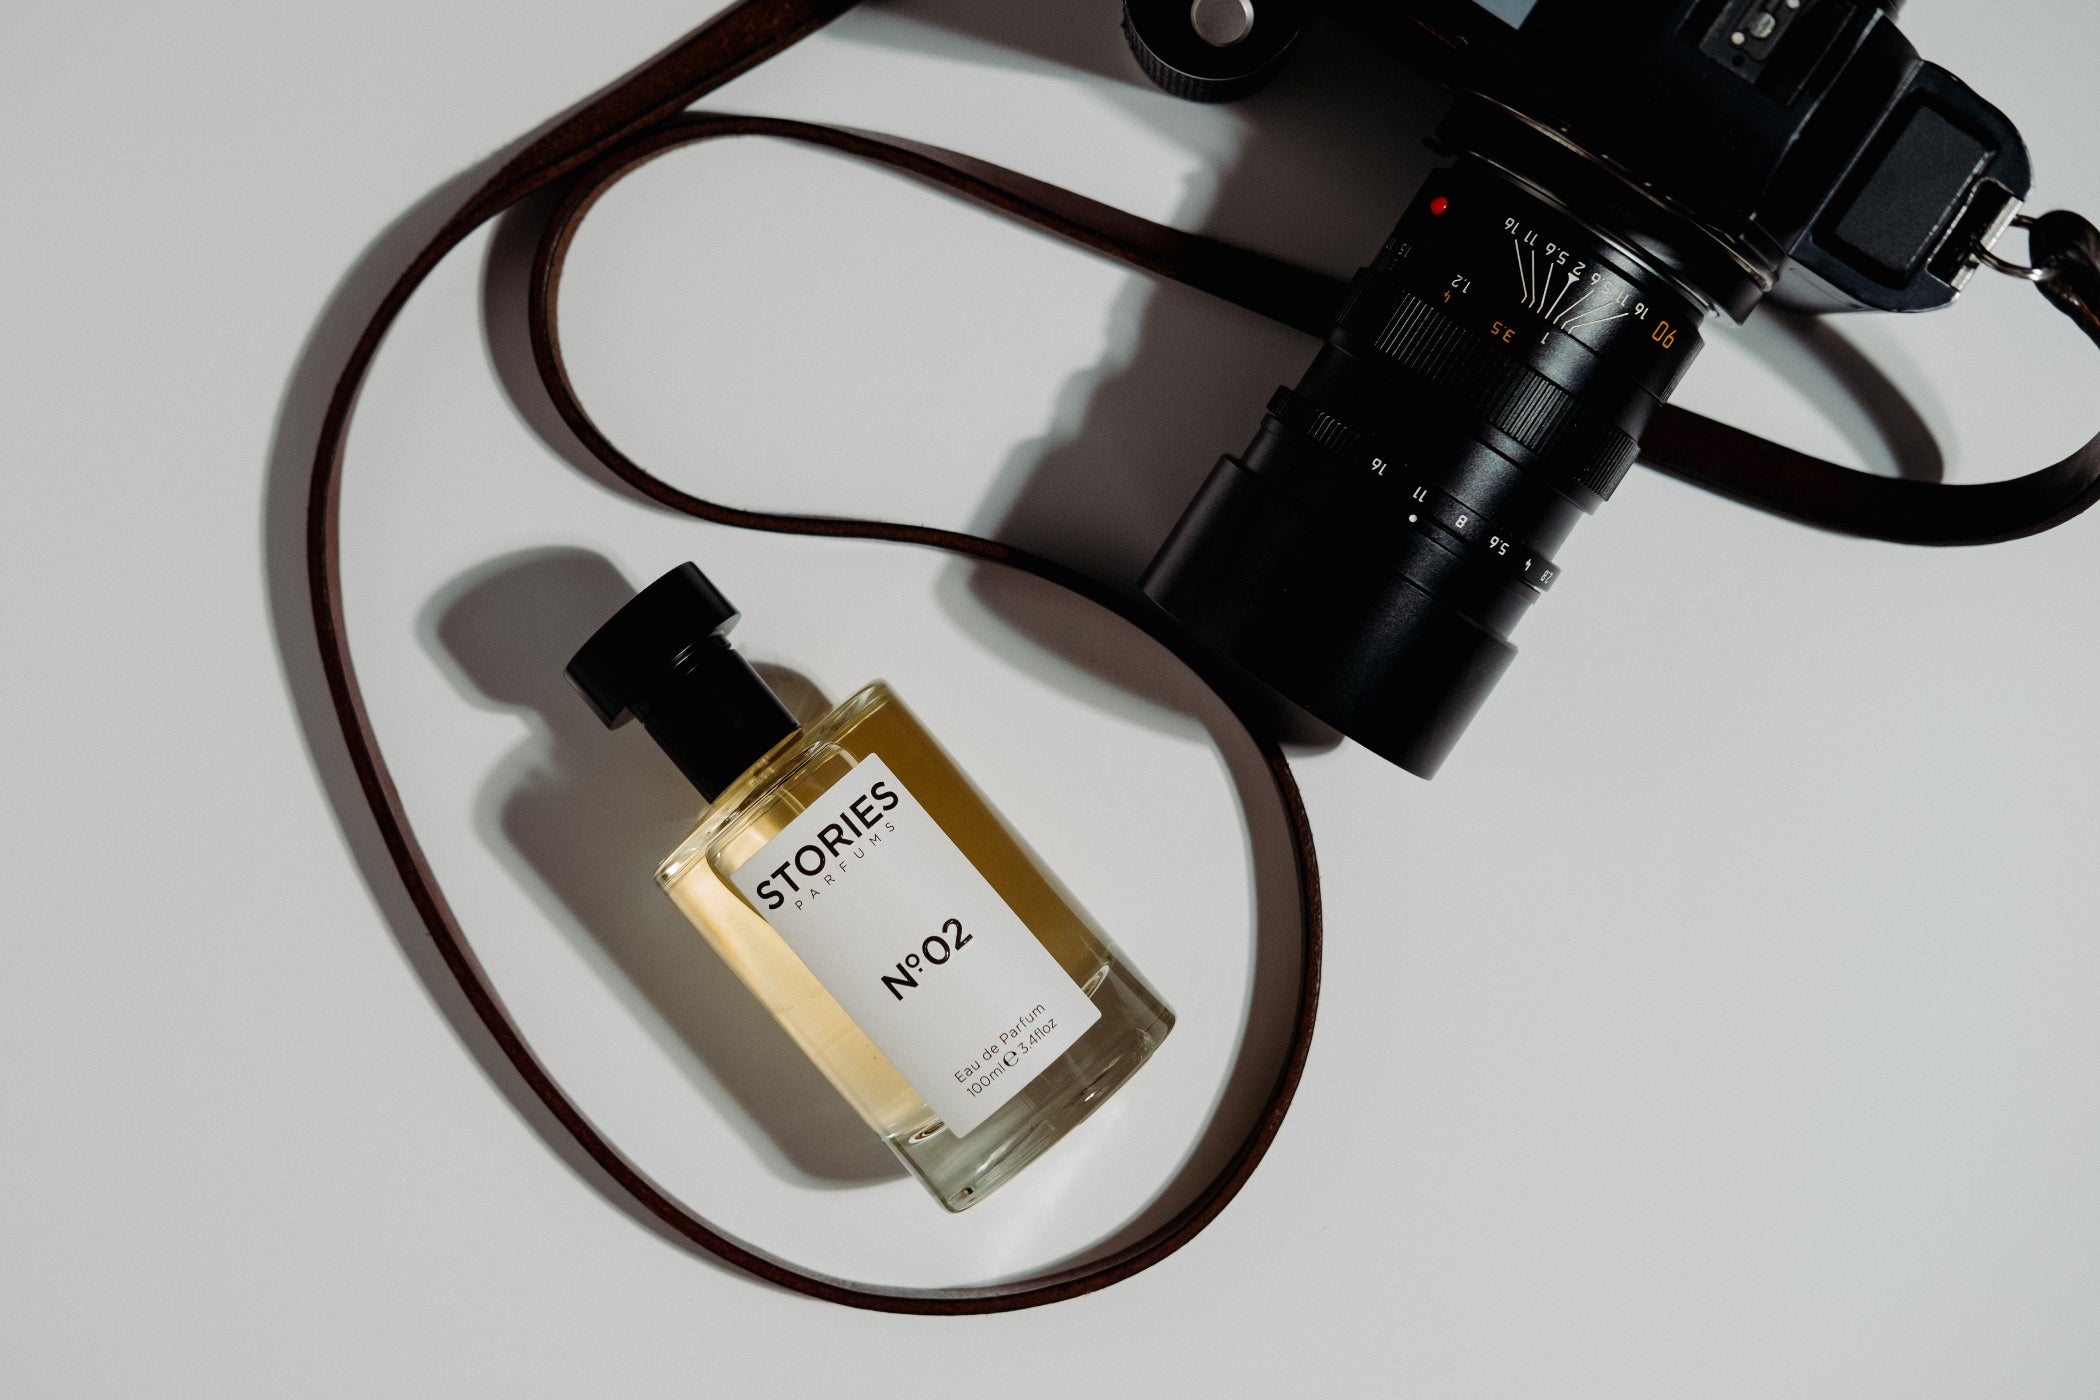 glass bottle of STORIES No.02 perfume next to a camera lense and strap